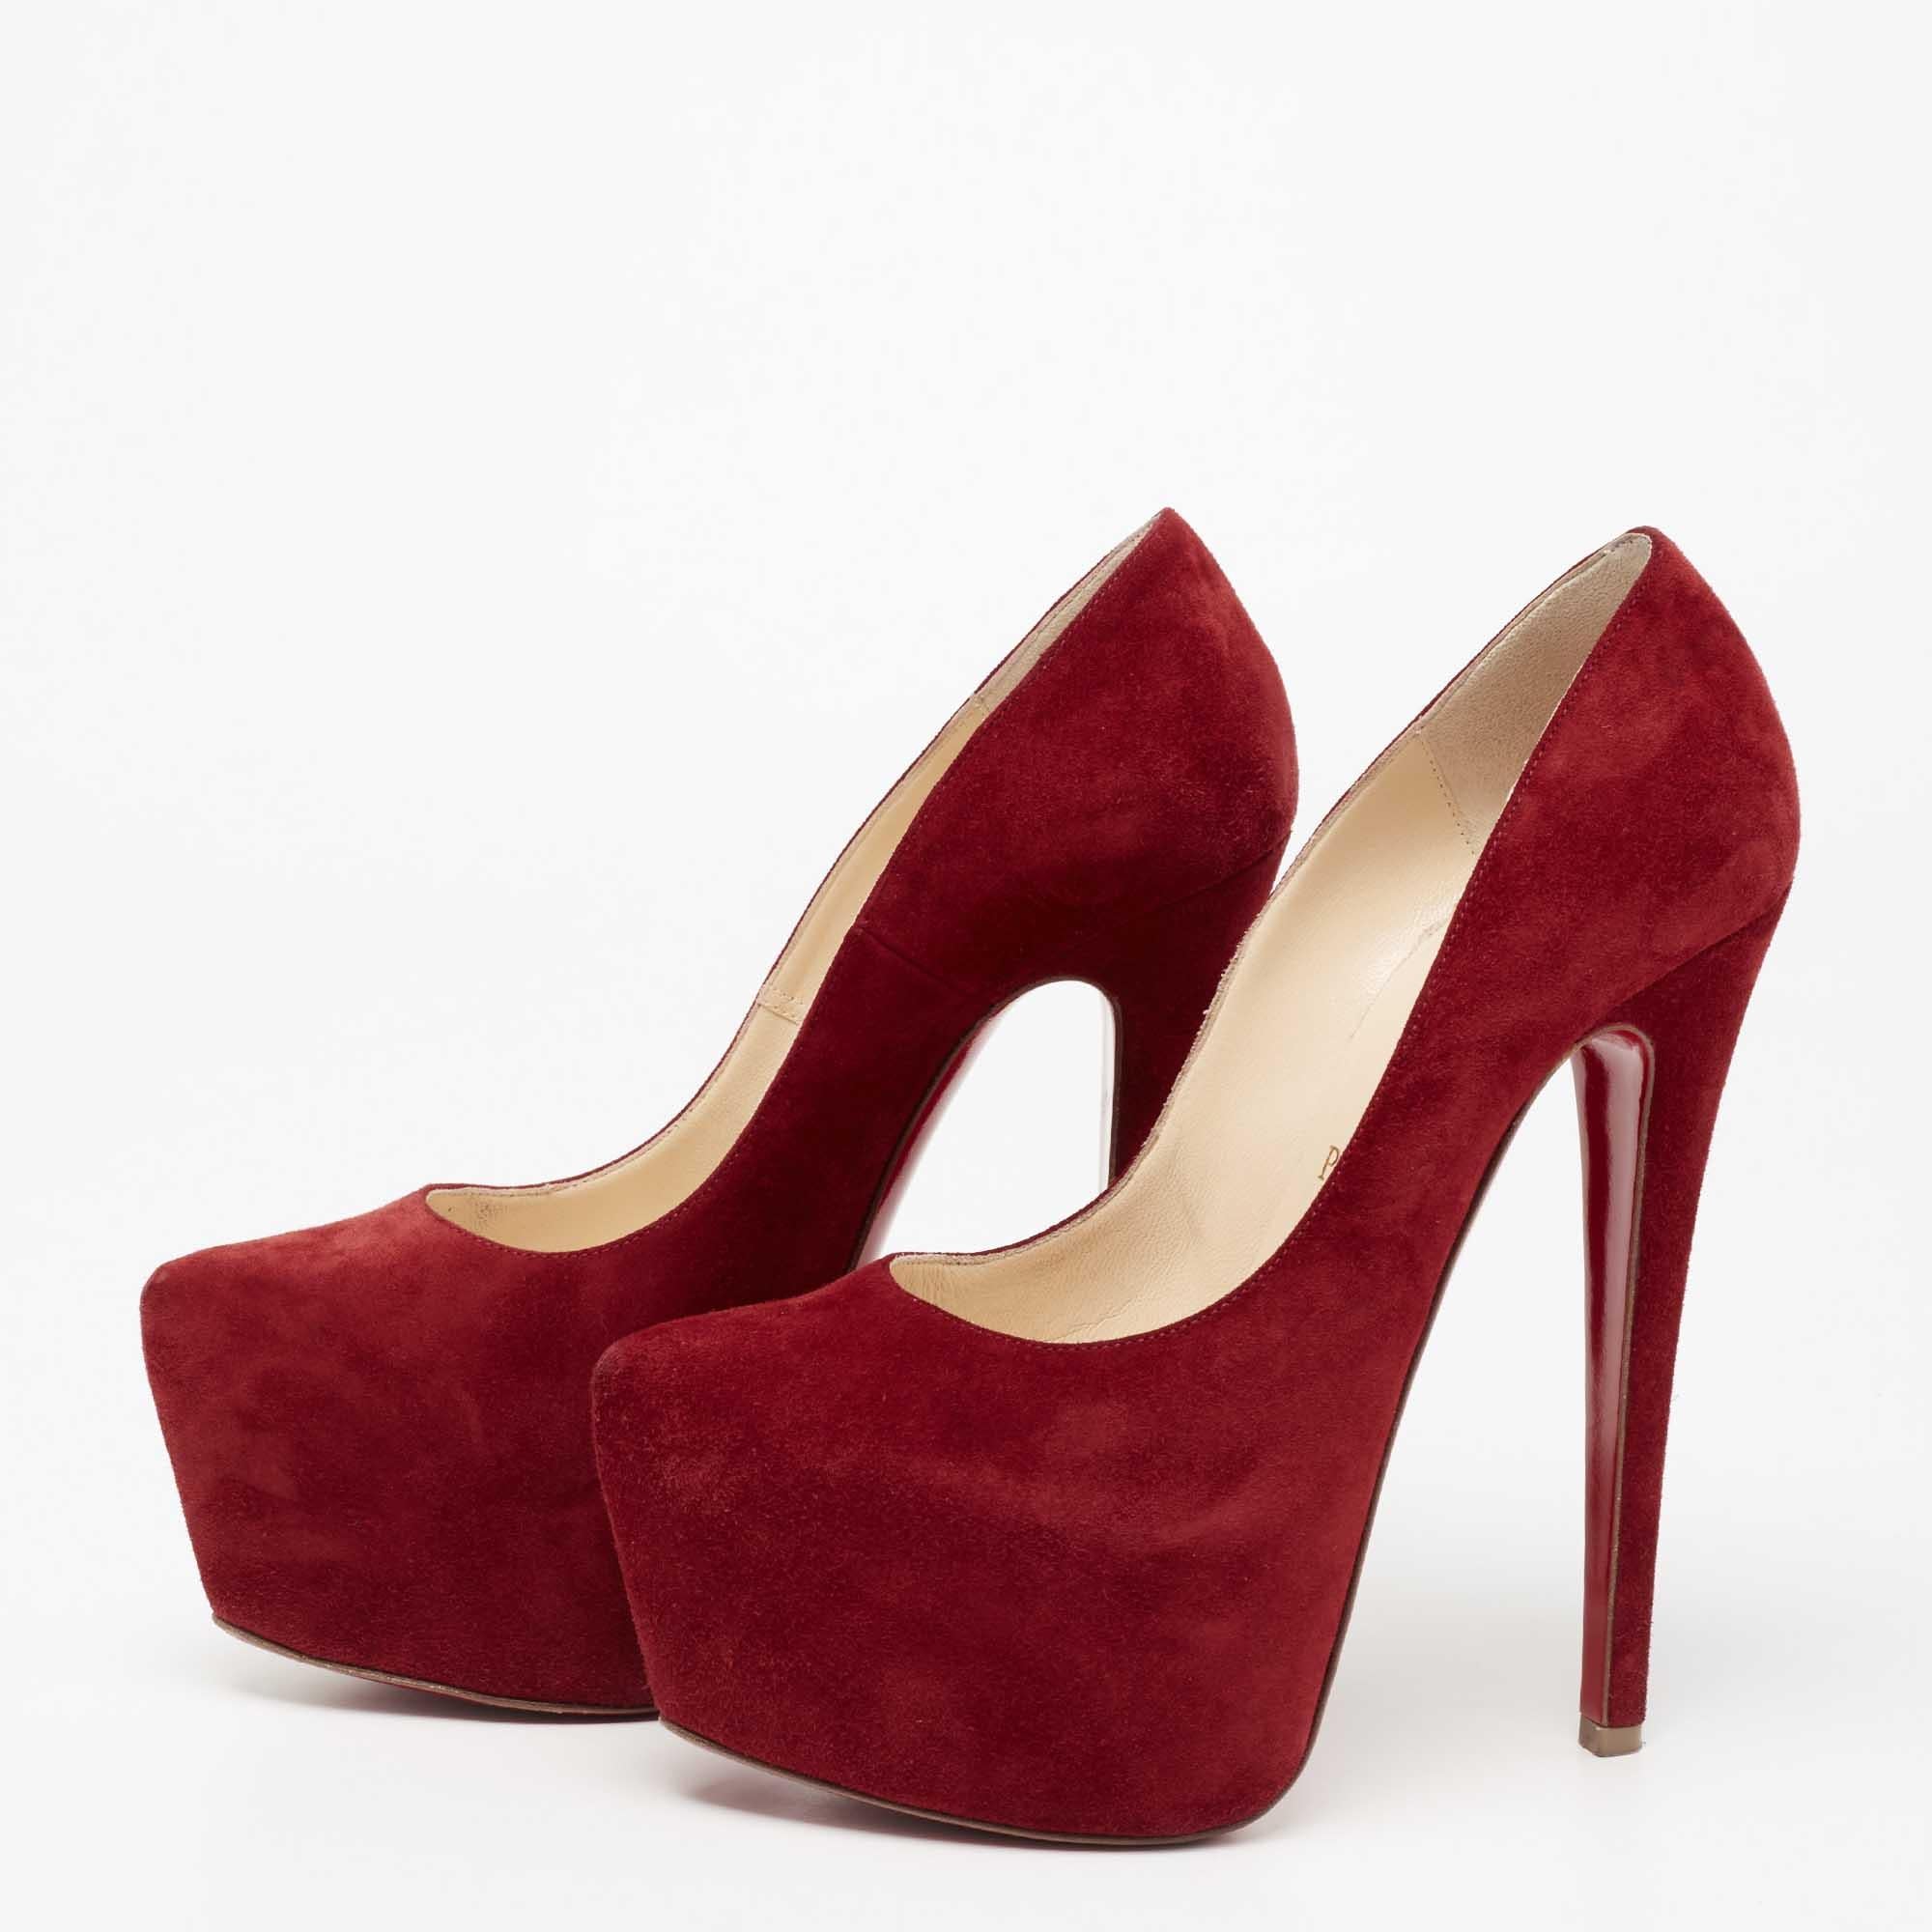 Christian Louboutin's timeless aesthetic and impeccable craftsmanship in shoemaking is evident in these statement pumps. Made from suede in a deep red shade, the sleek cuts will accentuate the curve of your feet. Finished off with high heels and